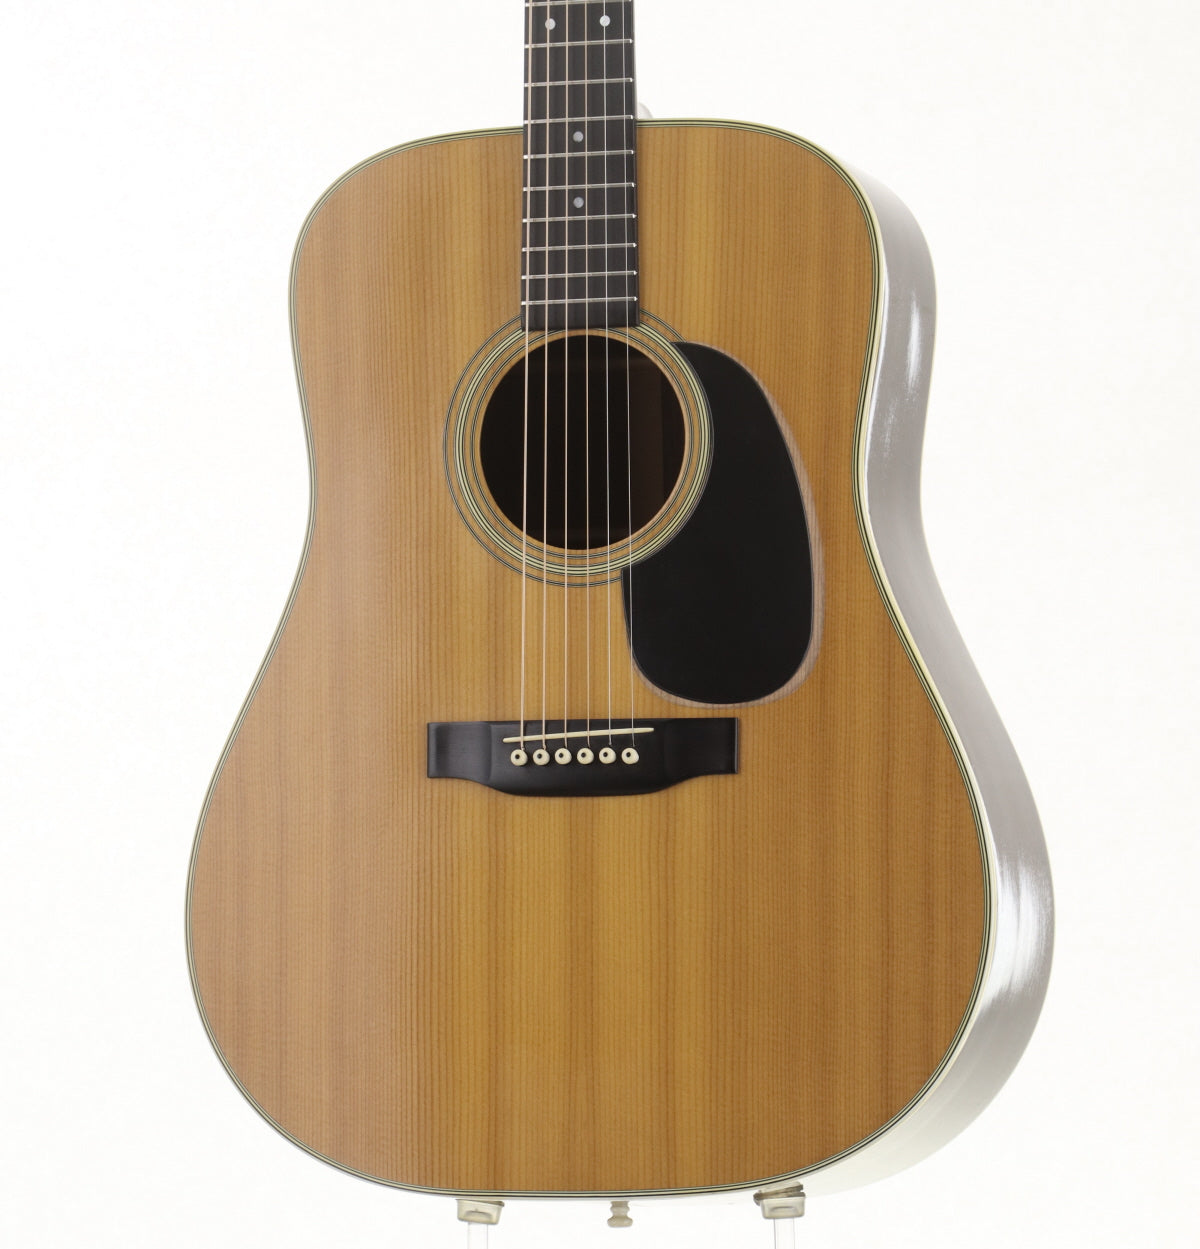 [SN 325891] USED Martin / D-28 made in 1973 [09]